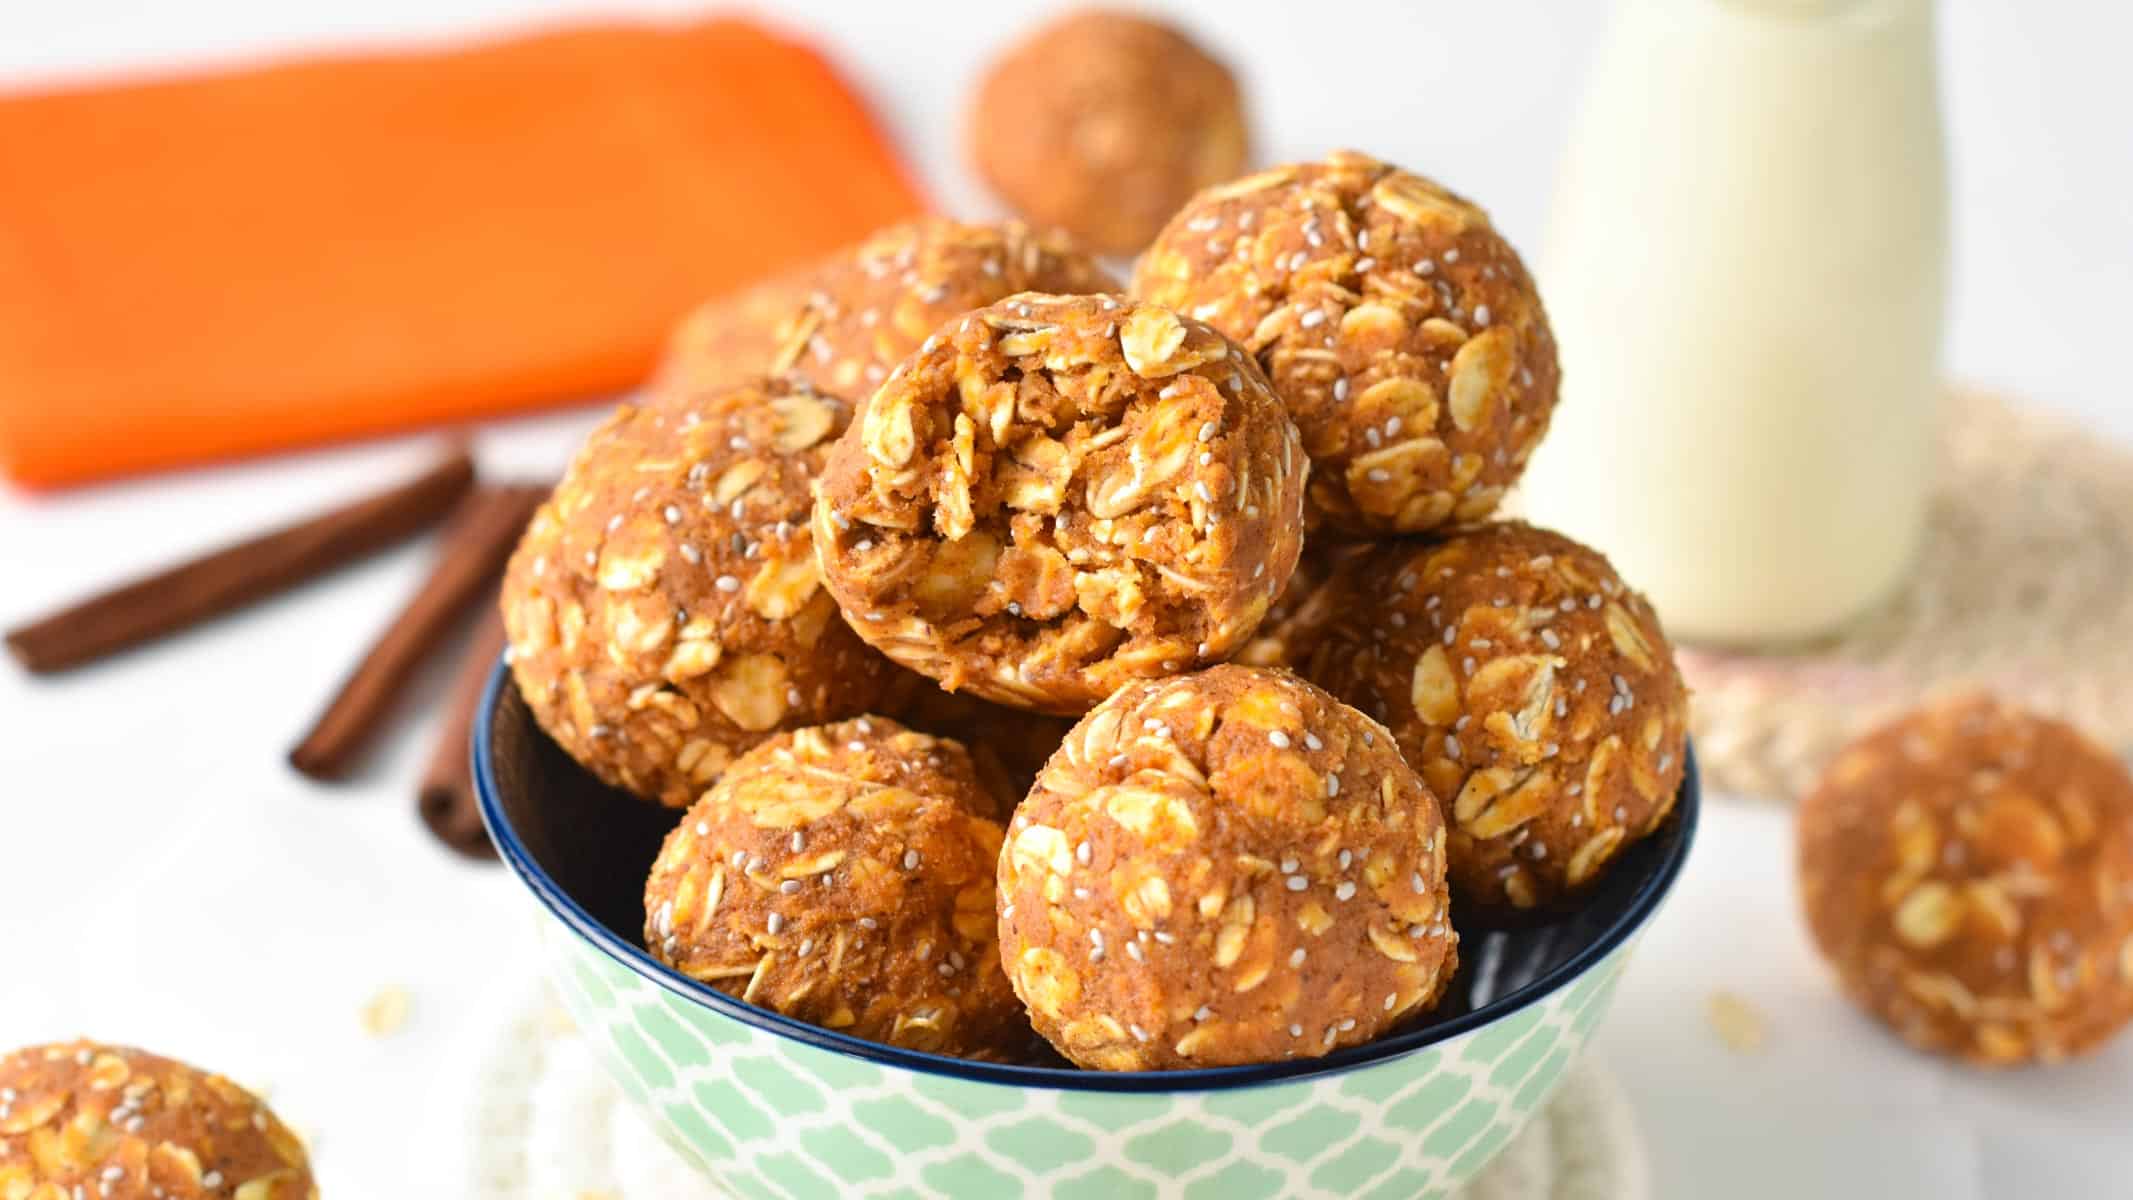 Protein Balls - 12 Delicious Recipes with Gluten Free, Paleo, Low Carb